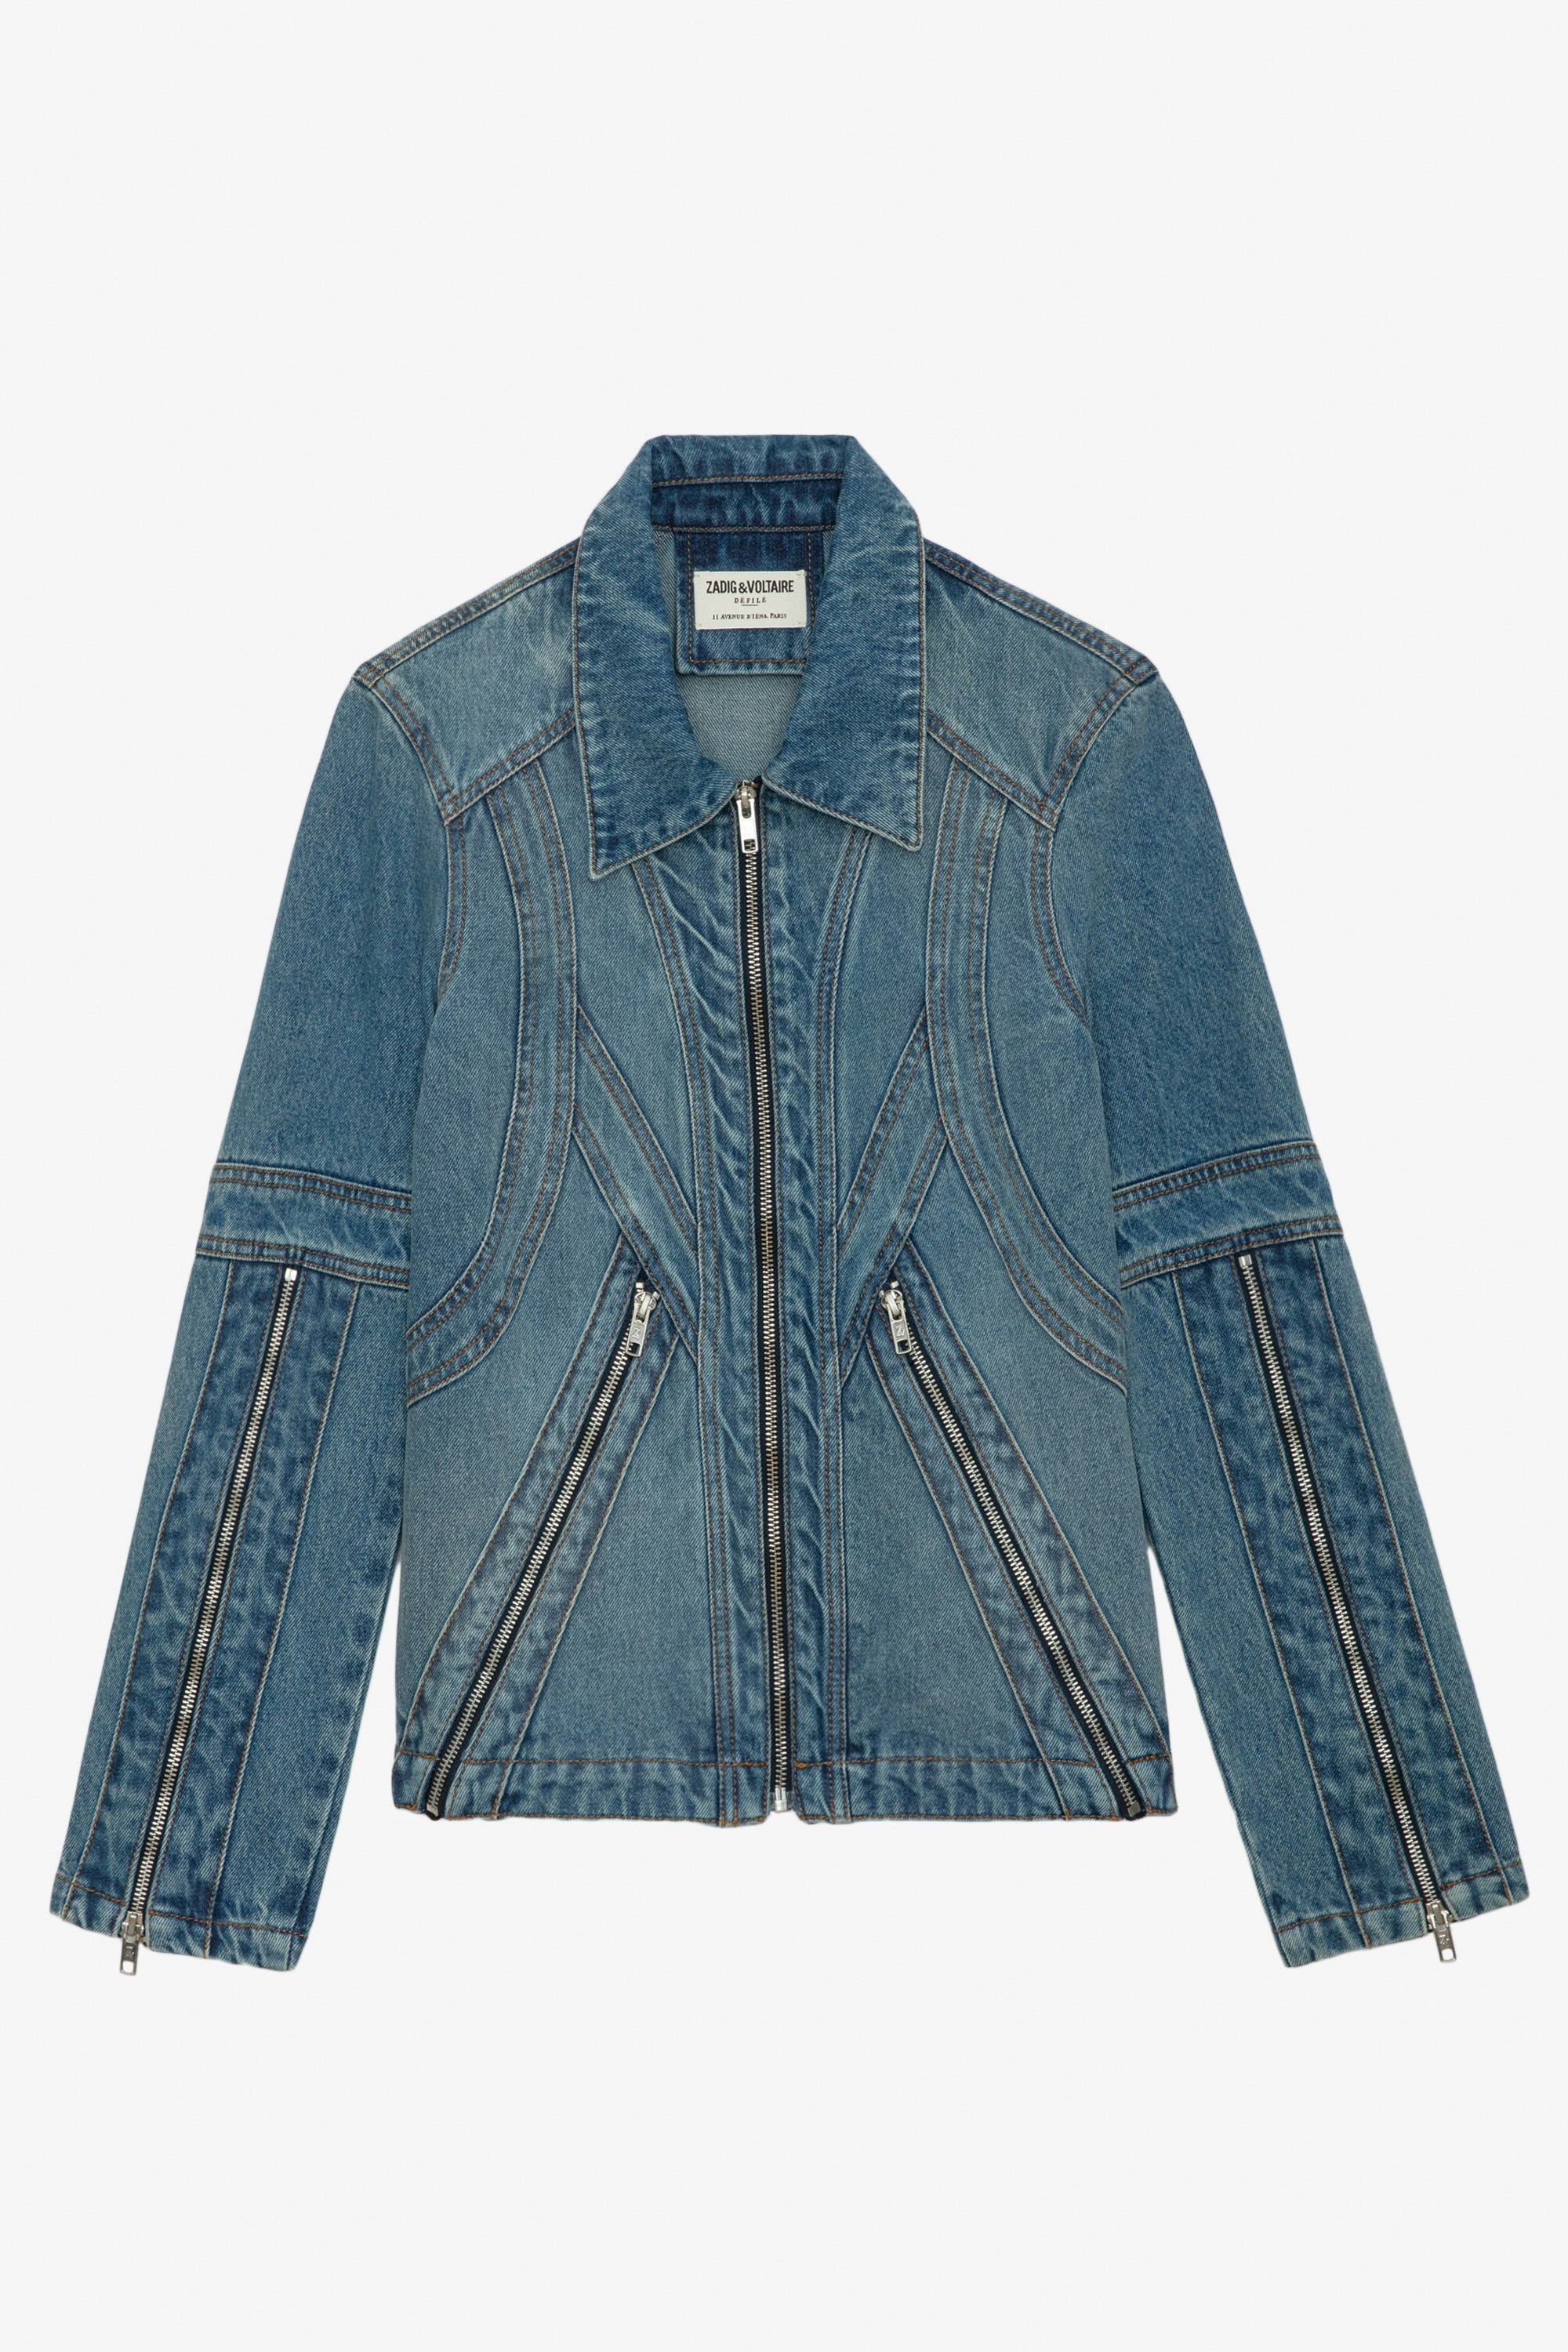 Bons Denim Jacket - Faded denim jacket with zip fastening and couture details.